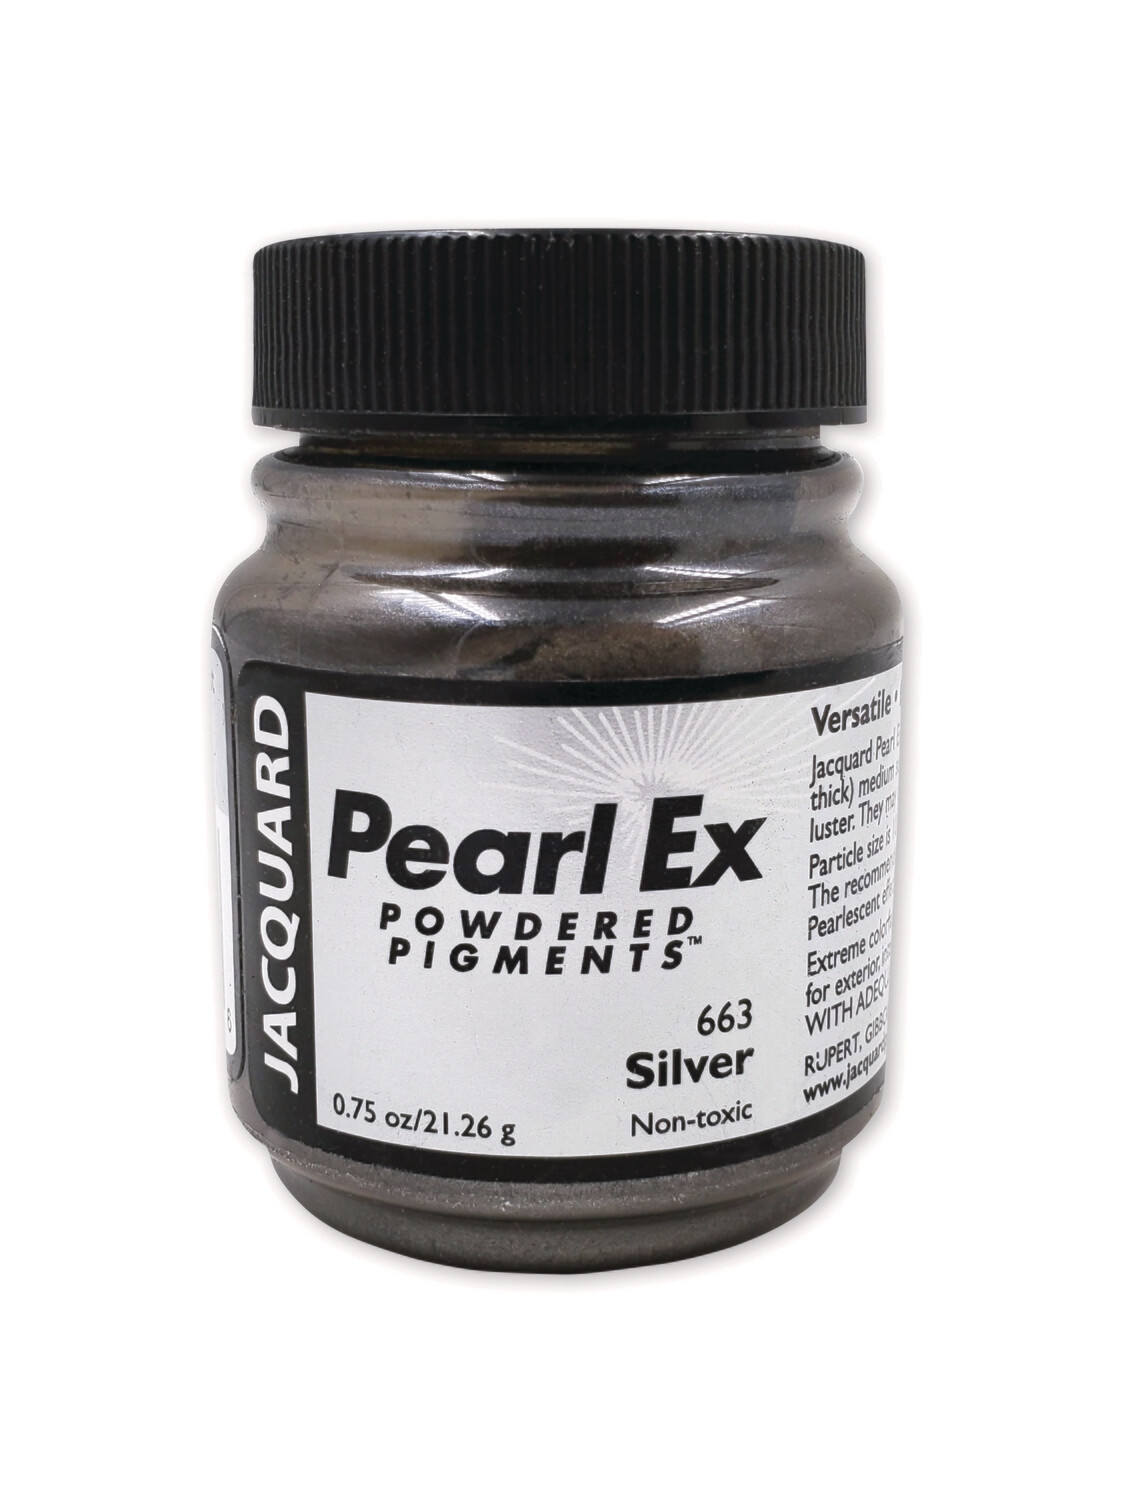 Pearl Ex Powdered Pigments-Silver